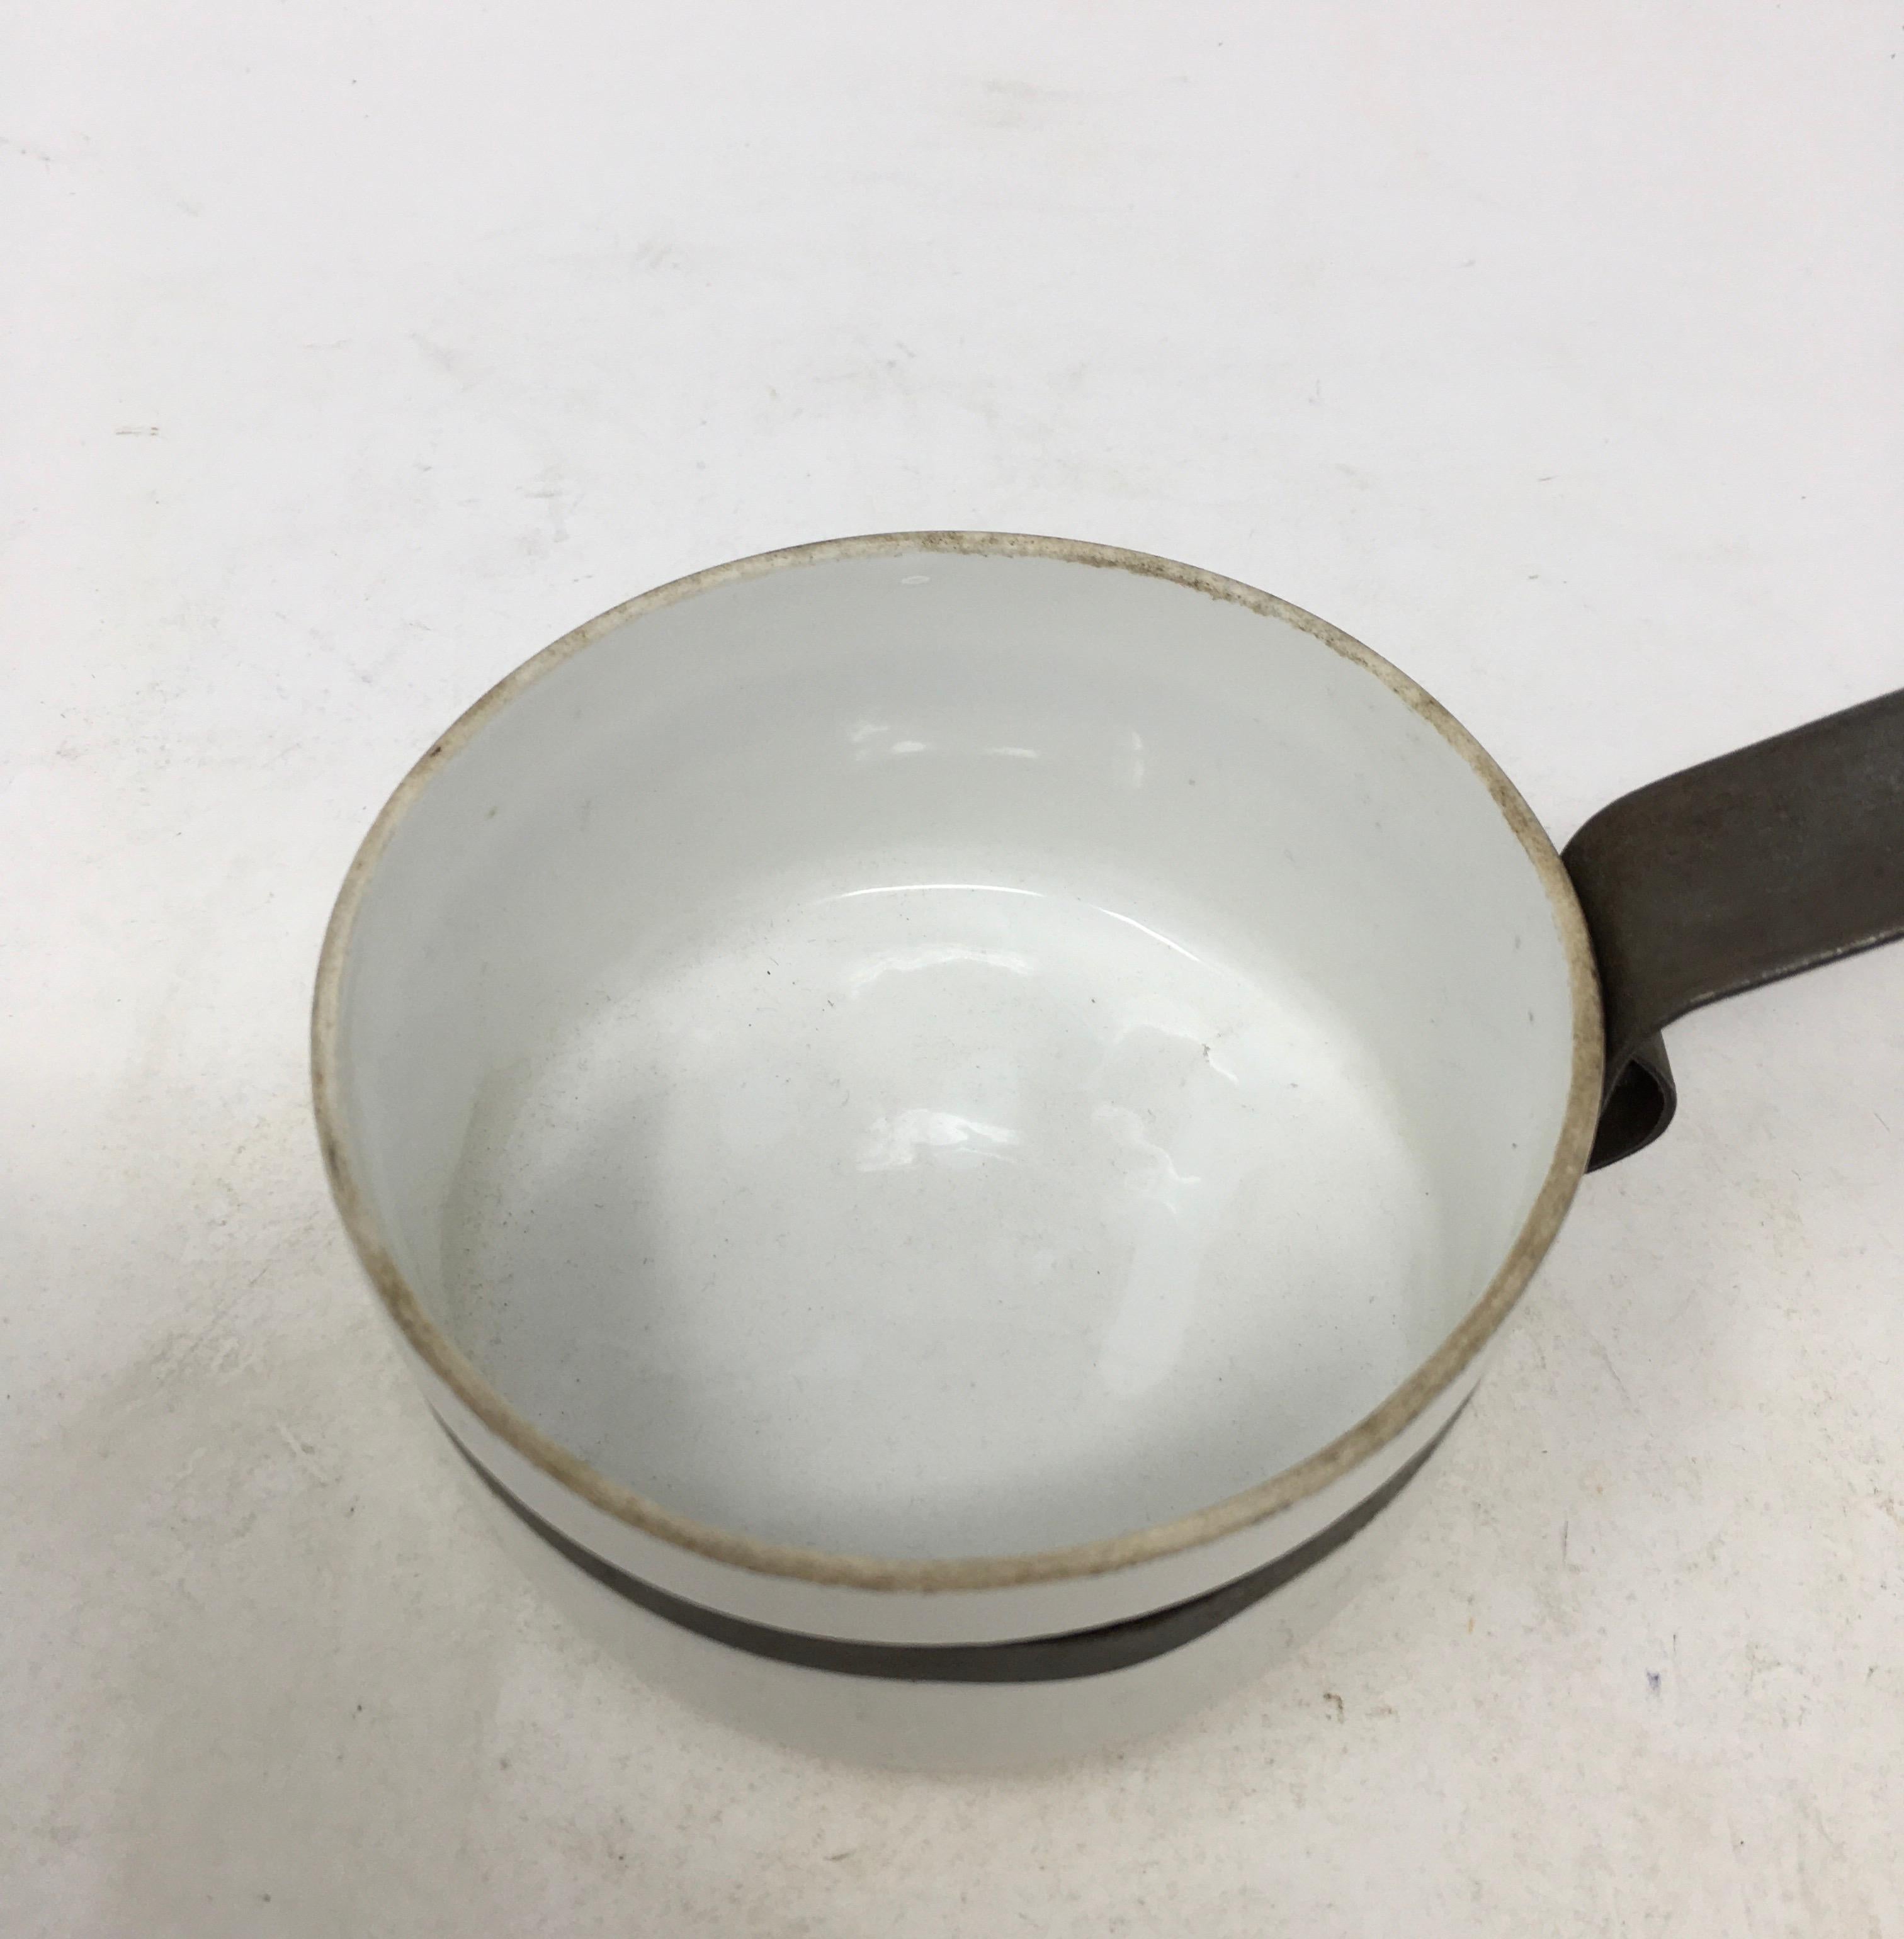 This petite French sauce pan is made of metal and porcelain. The perfect size for melting butter, it would be a welcome addition to any collection or kitchen. The pan is only 2